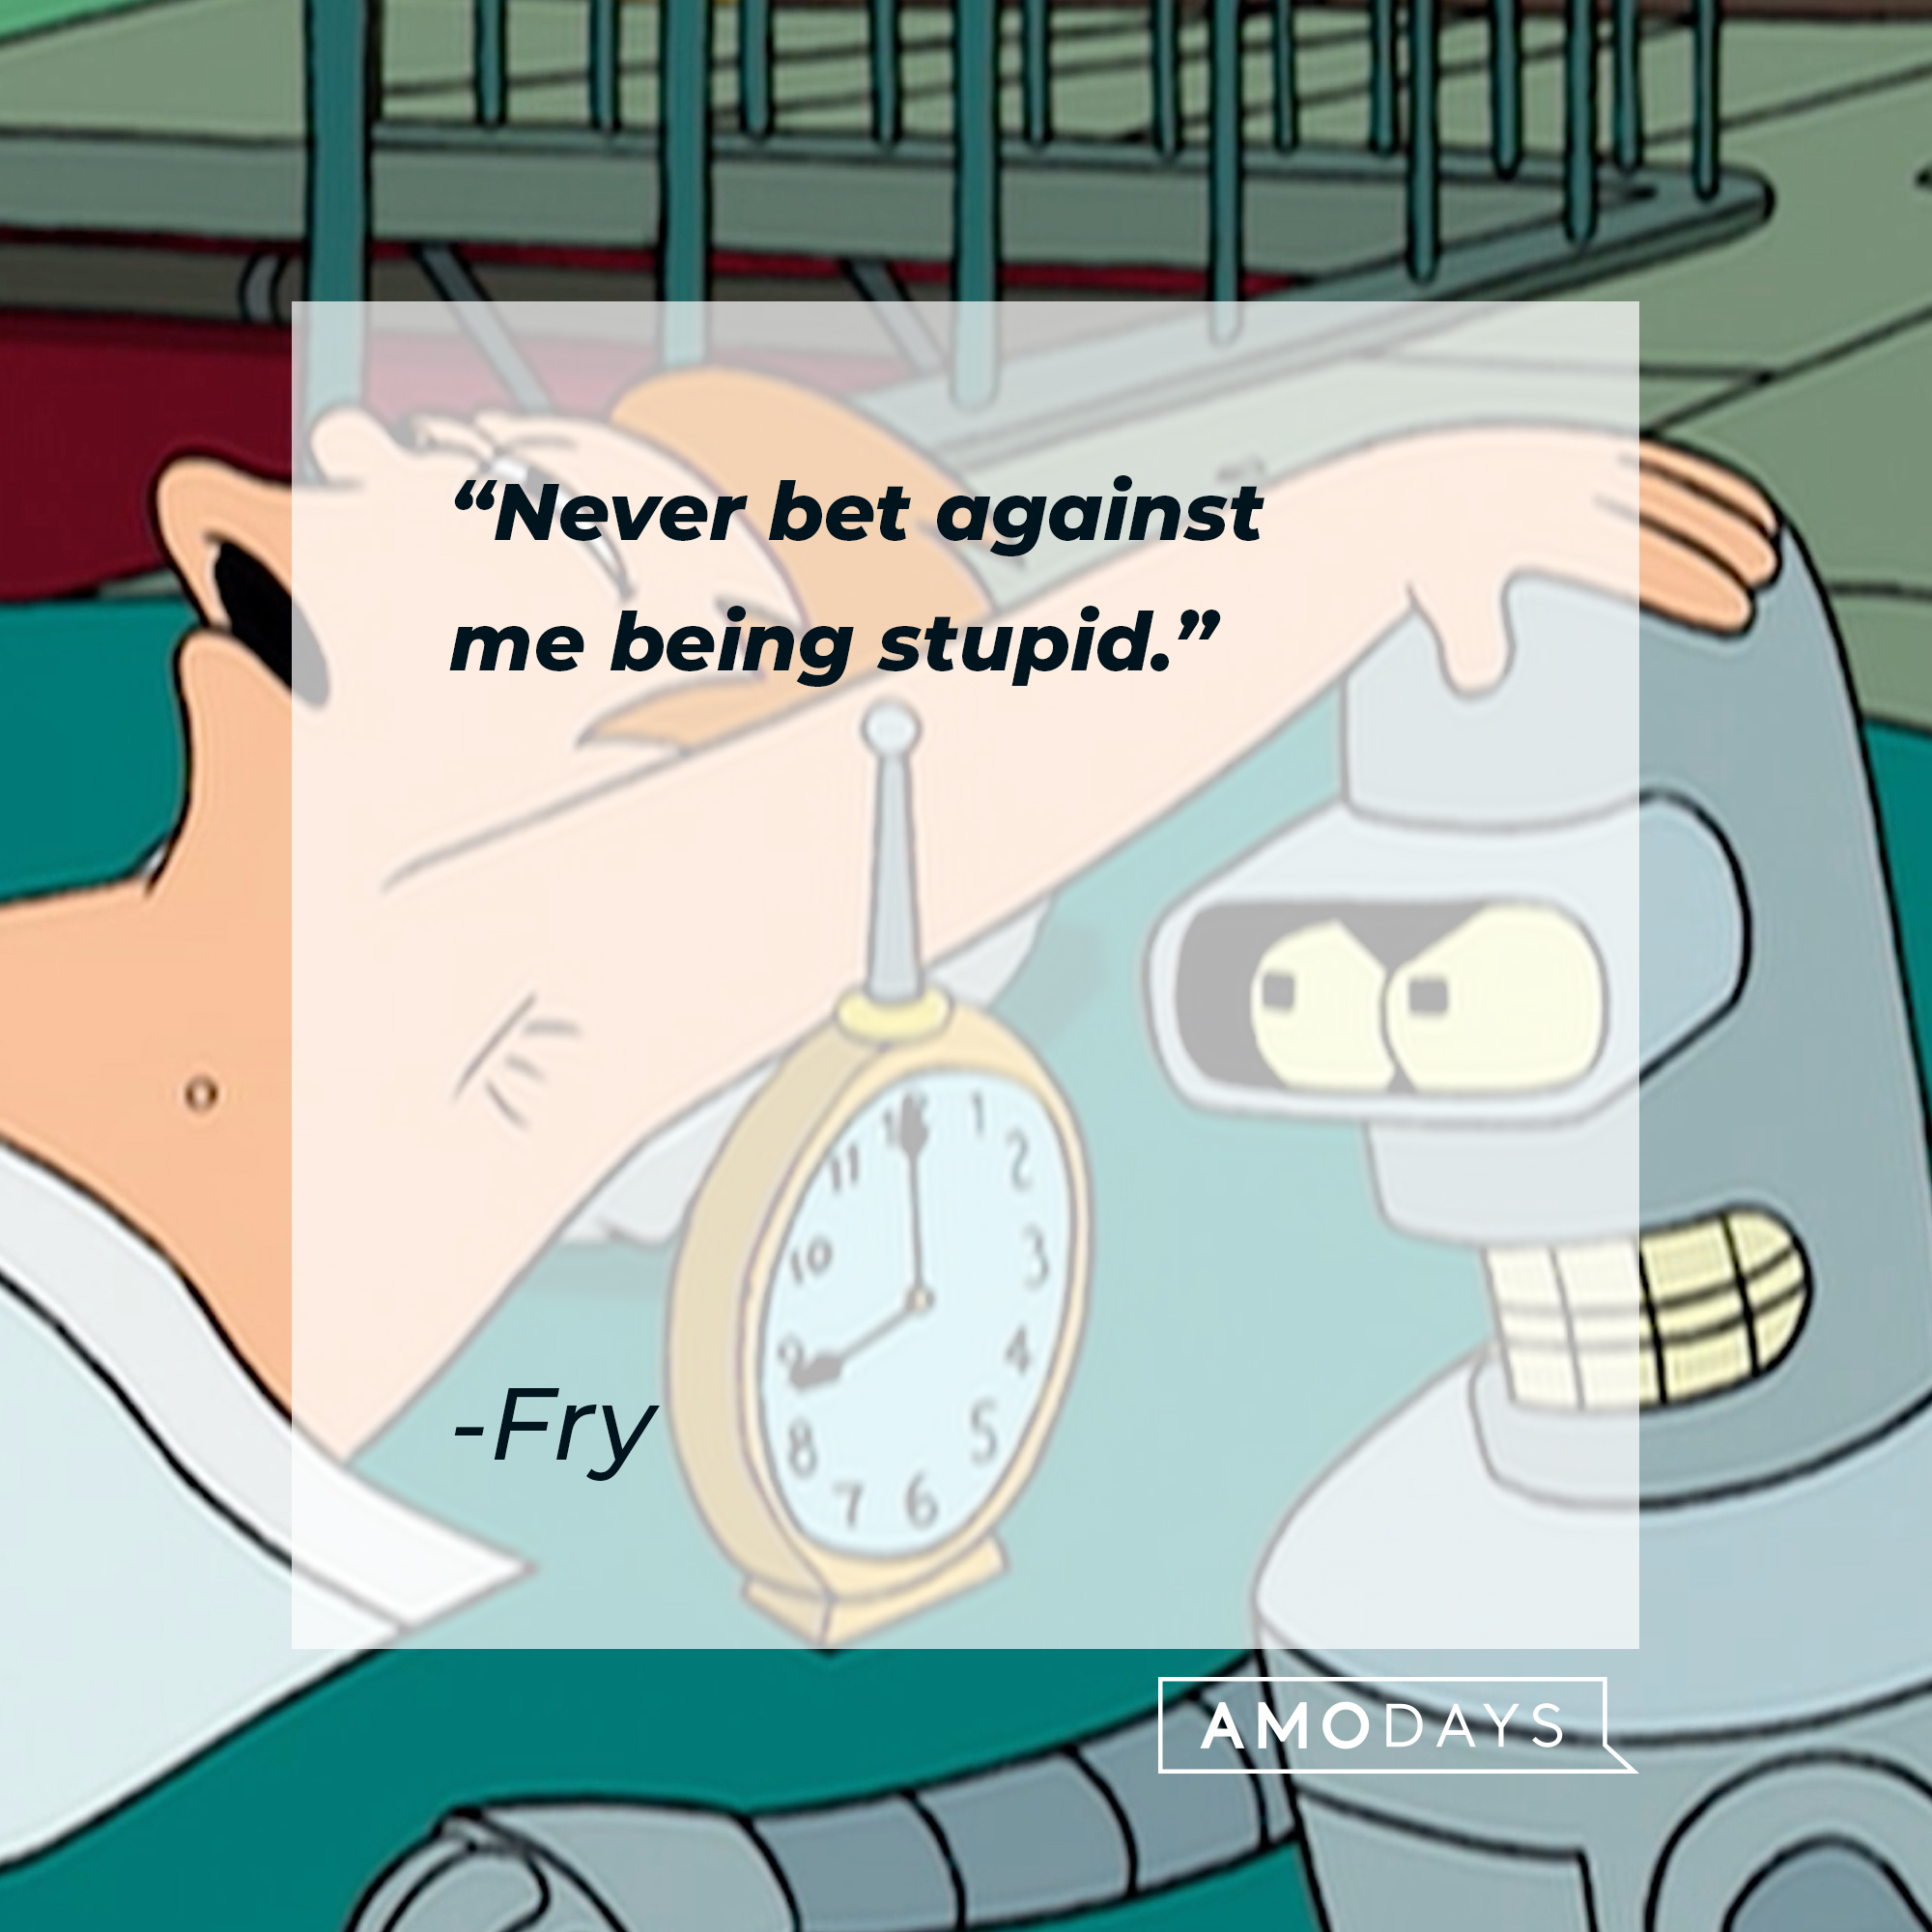 Fry Futurama's quote: "Never bet against me being stupid." | Source: Facebook.com/Futurama